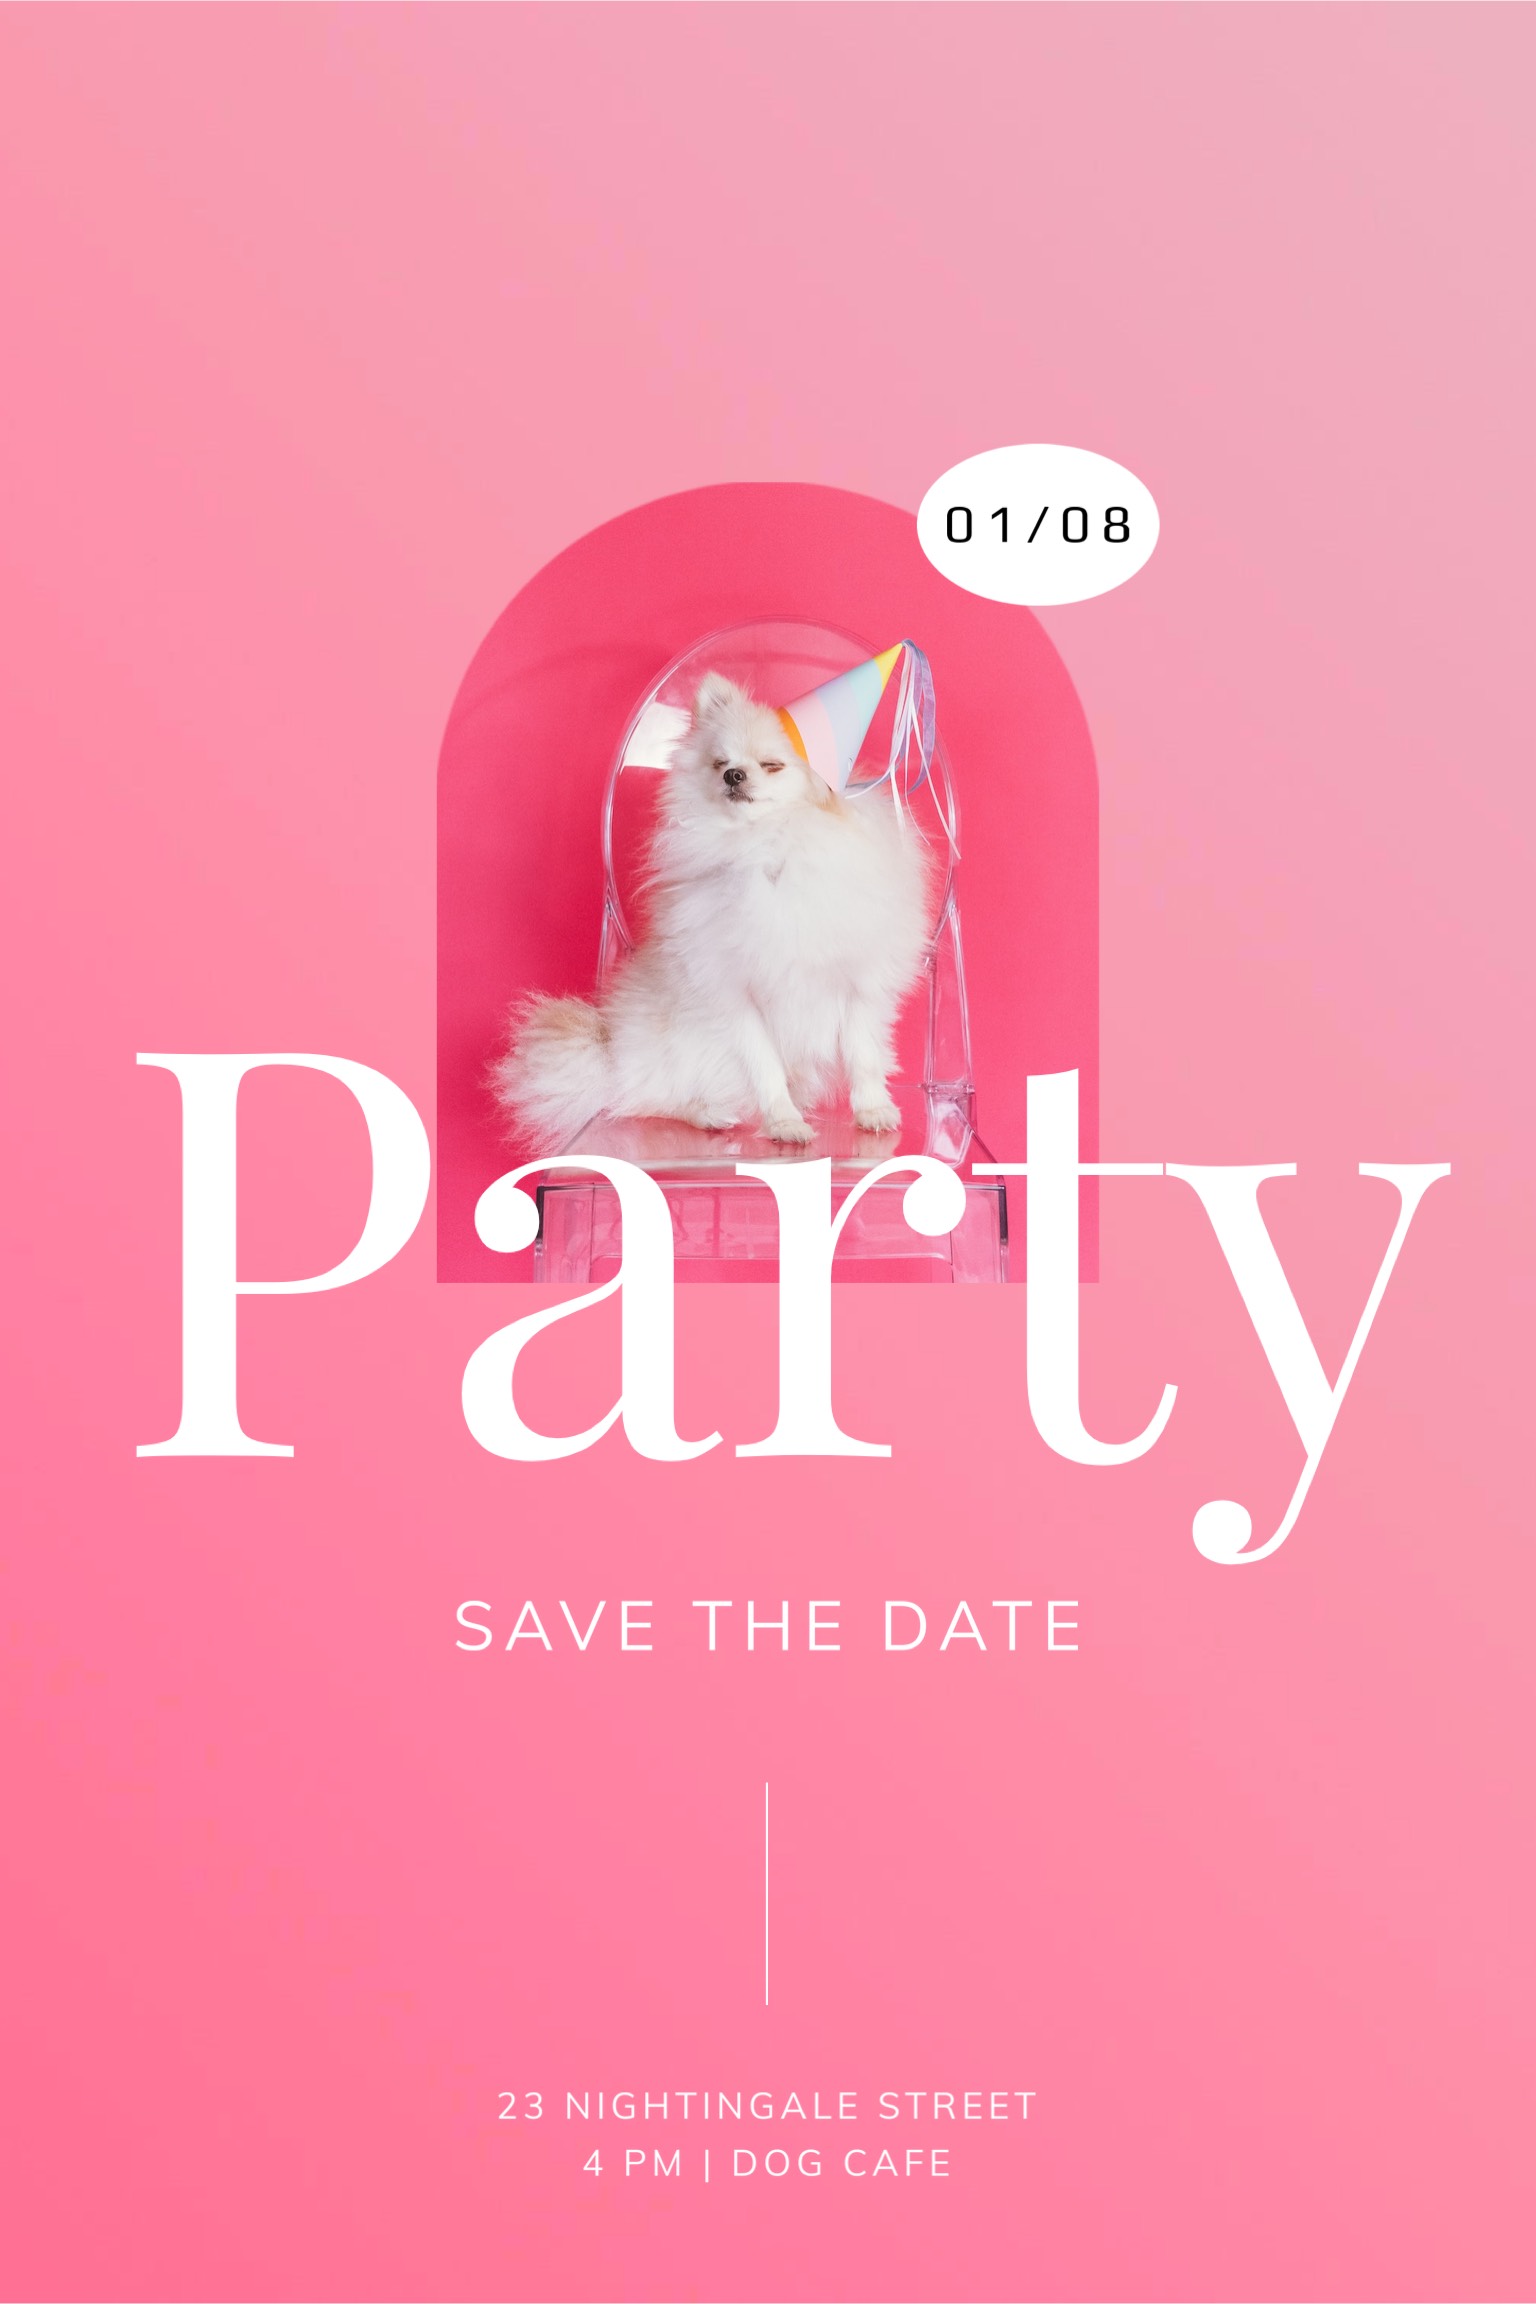 A Pink Party Flyer With A Small White Dog Invitation Template